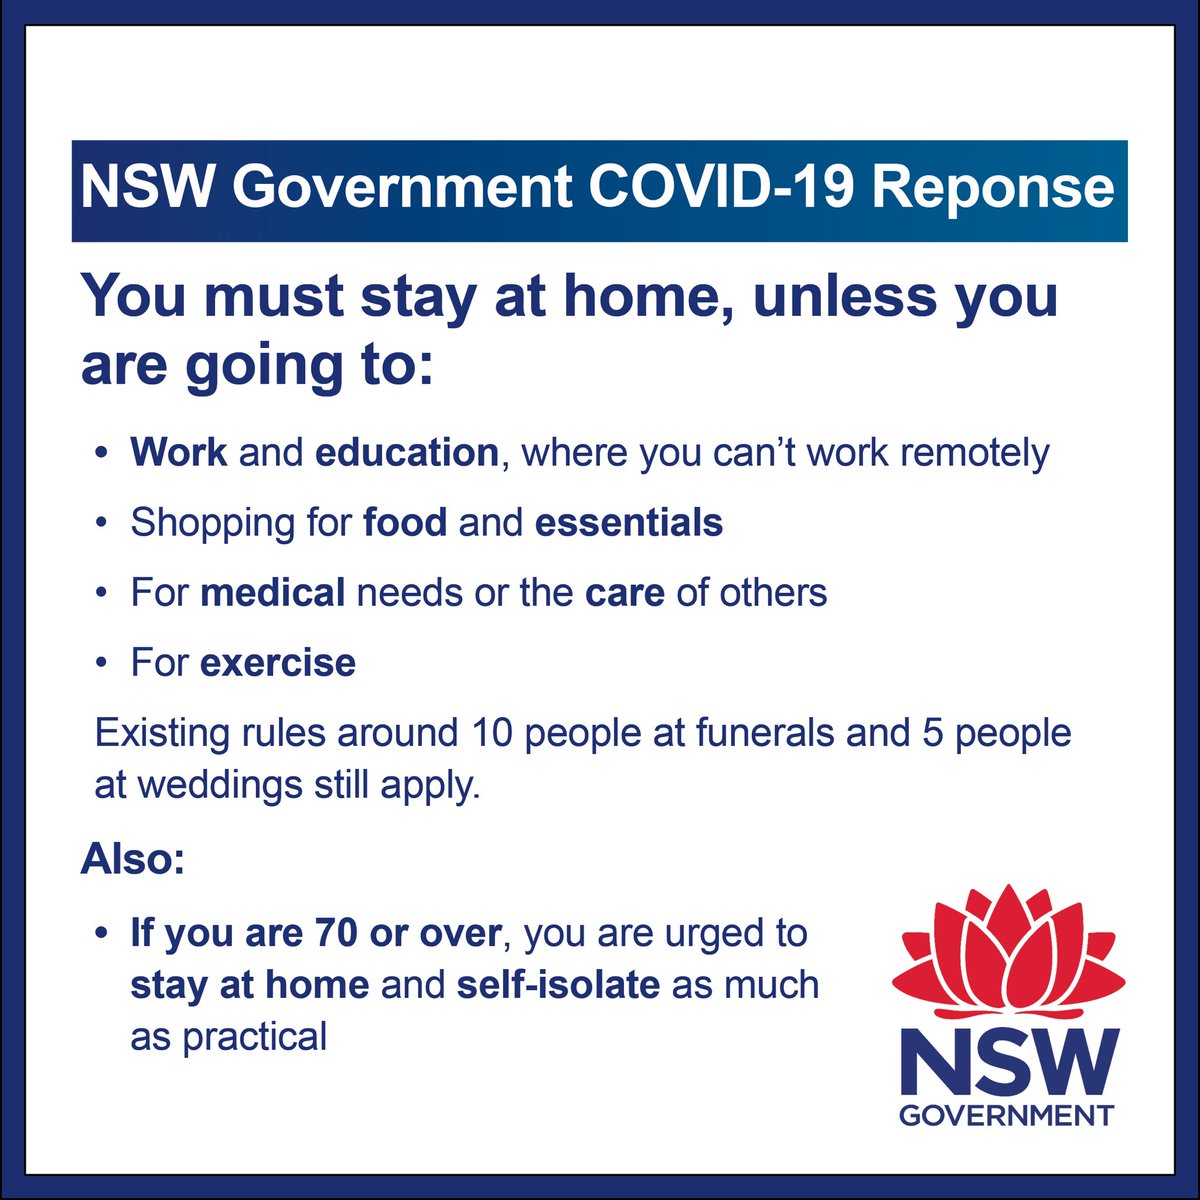 #Covid19 updated response and advice: Stay at home unless you absolutely need to for things like - going out irregularly for groceries 🛒 - short solo exercise 🏃‍♀️🚴‍♂️ - medical reasons or if you are caring for family 🏥 Keep up to date at nsw.gov.au